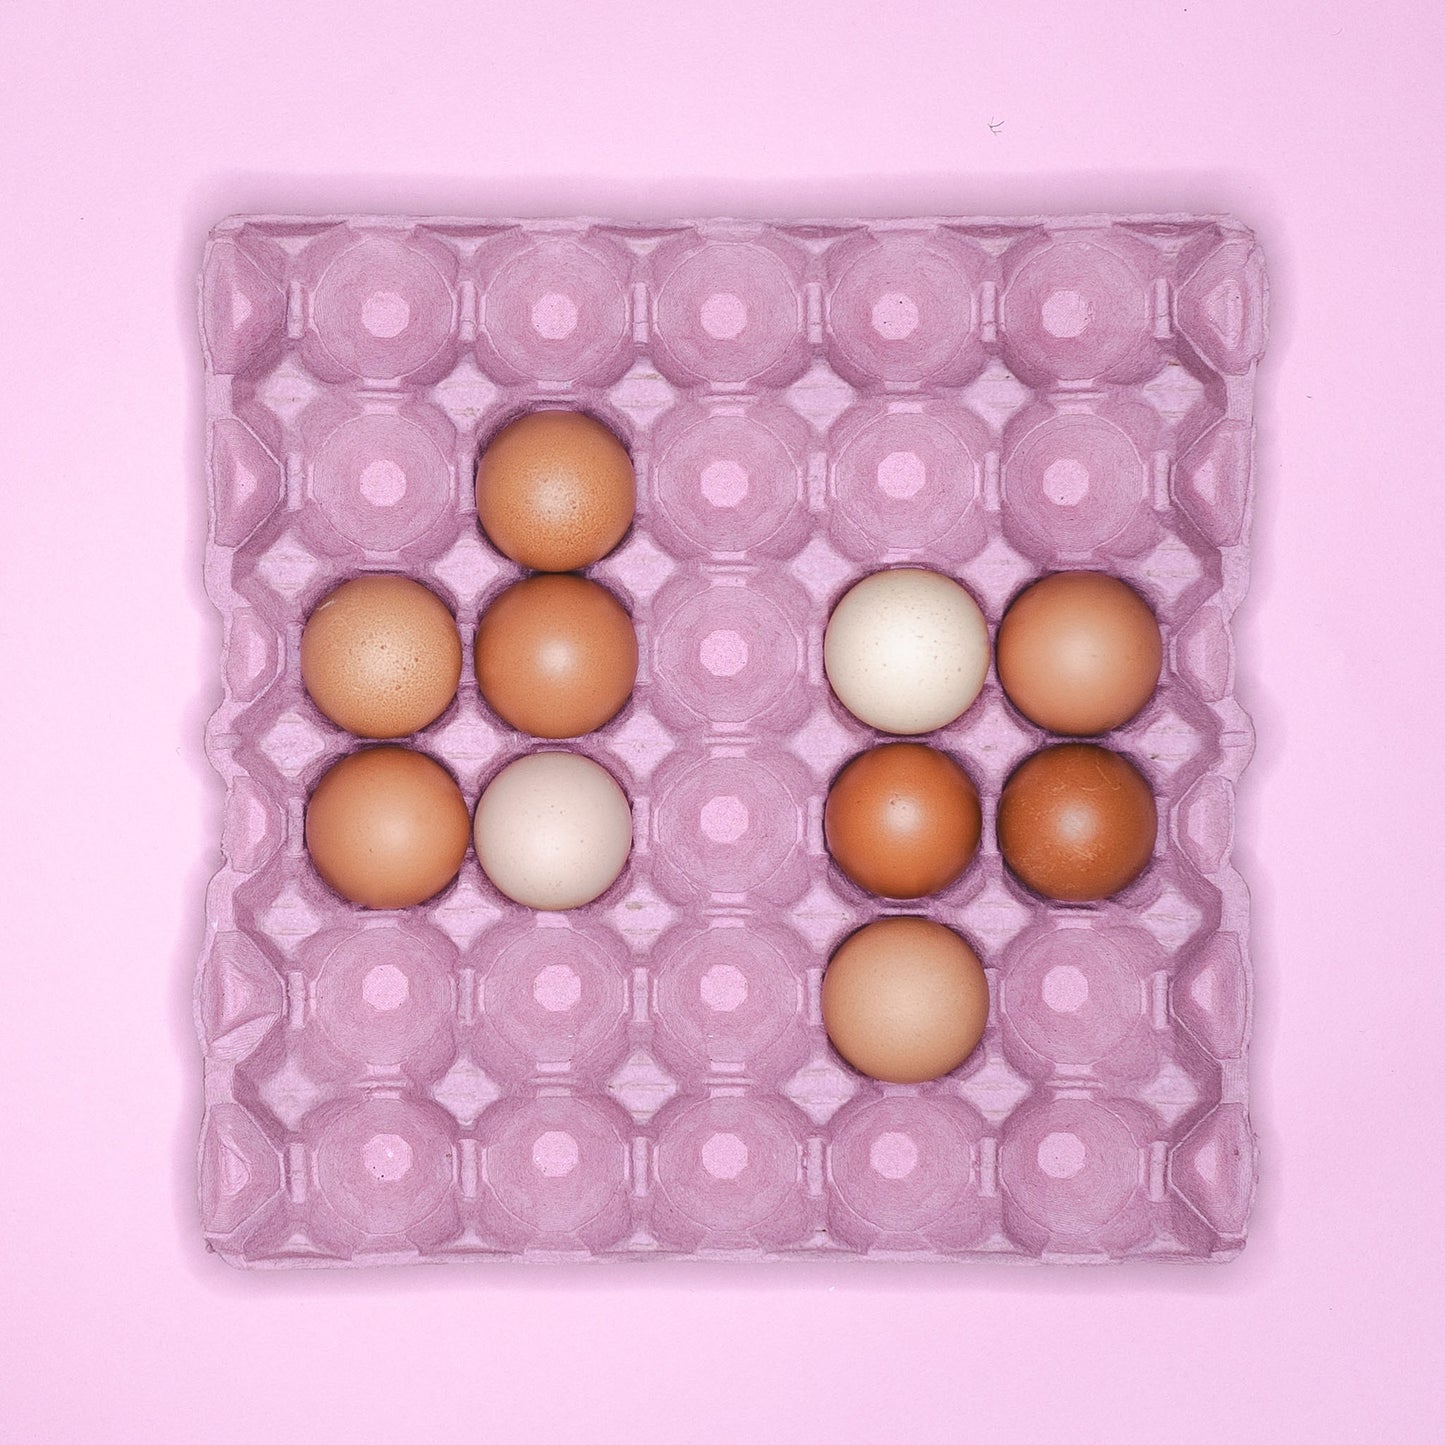 A pink cardboard tray holding 10 eggs